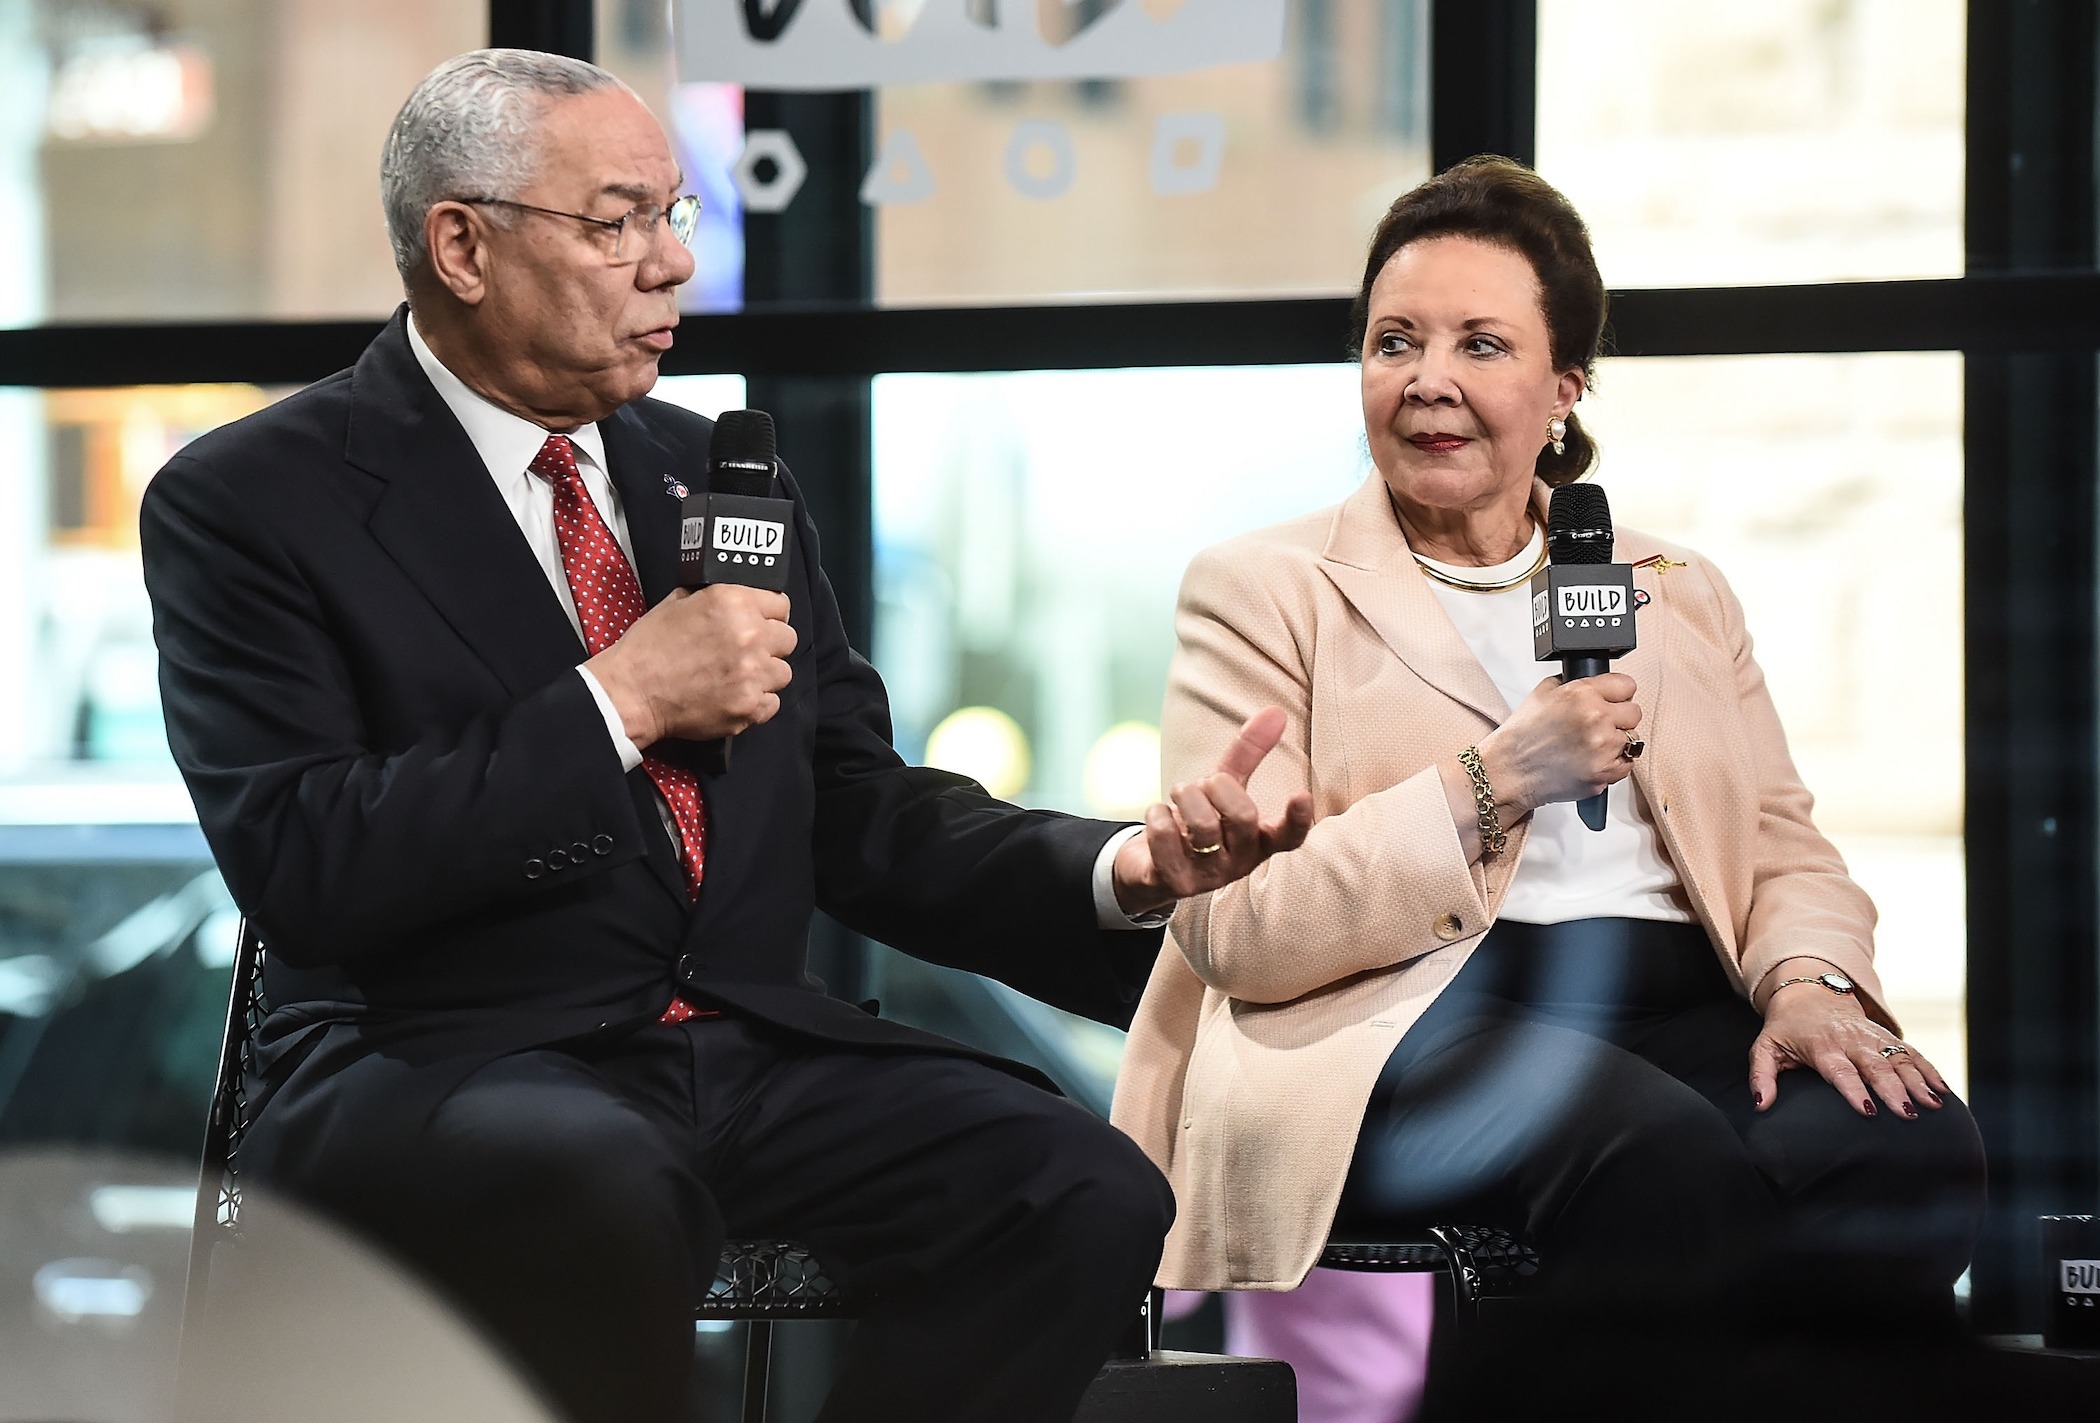 Colin Powell and Colin Powell's wife, Alma Powell, speaking at an event